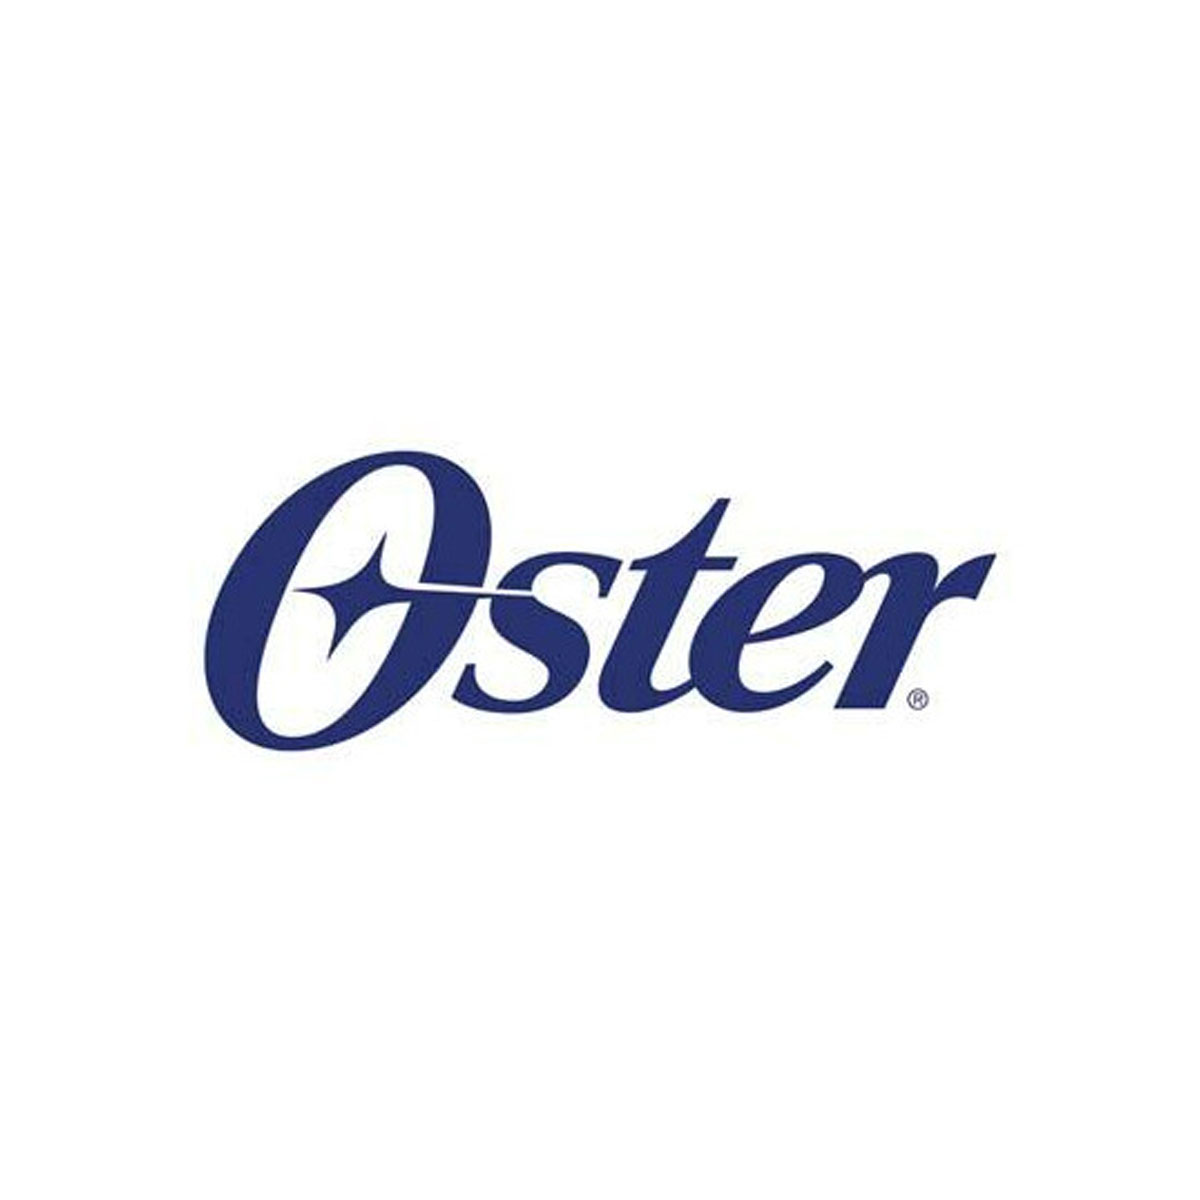 Oster.png                                                                                                                                                                                                                                                     